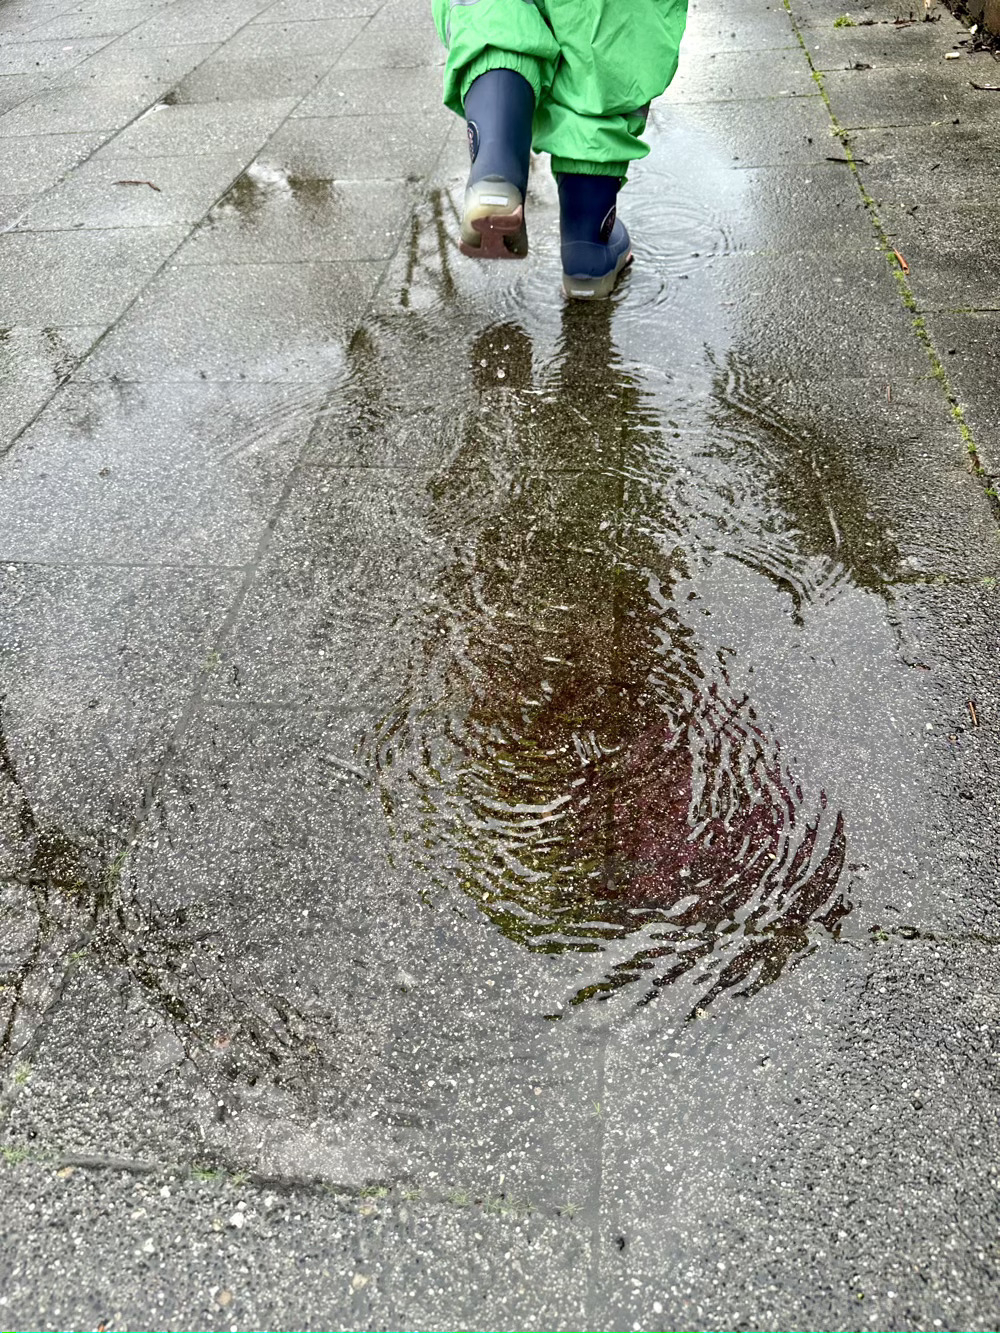 Reflection in puddle on the sidewalk of little girl walking away.